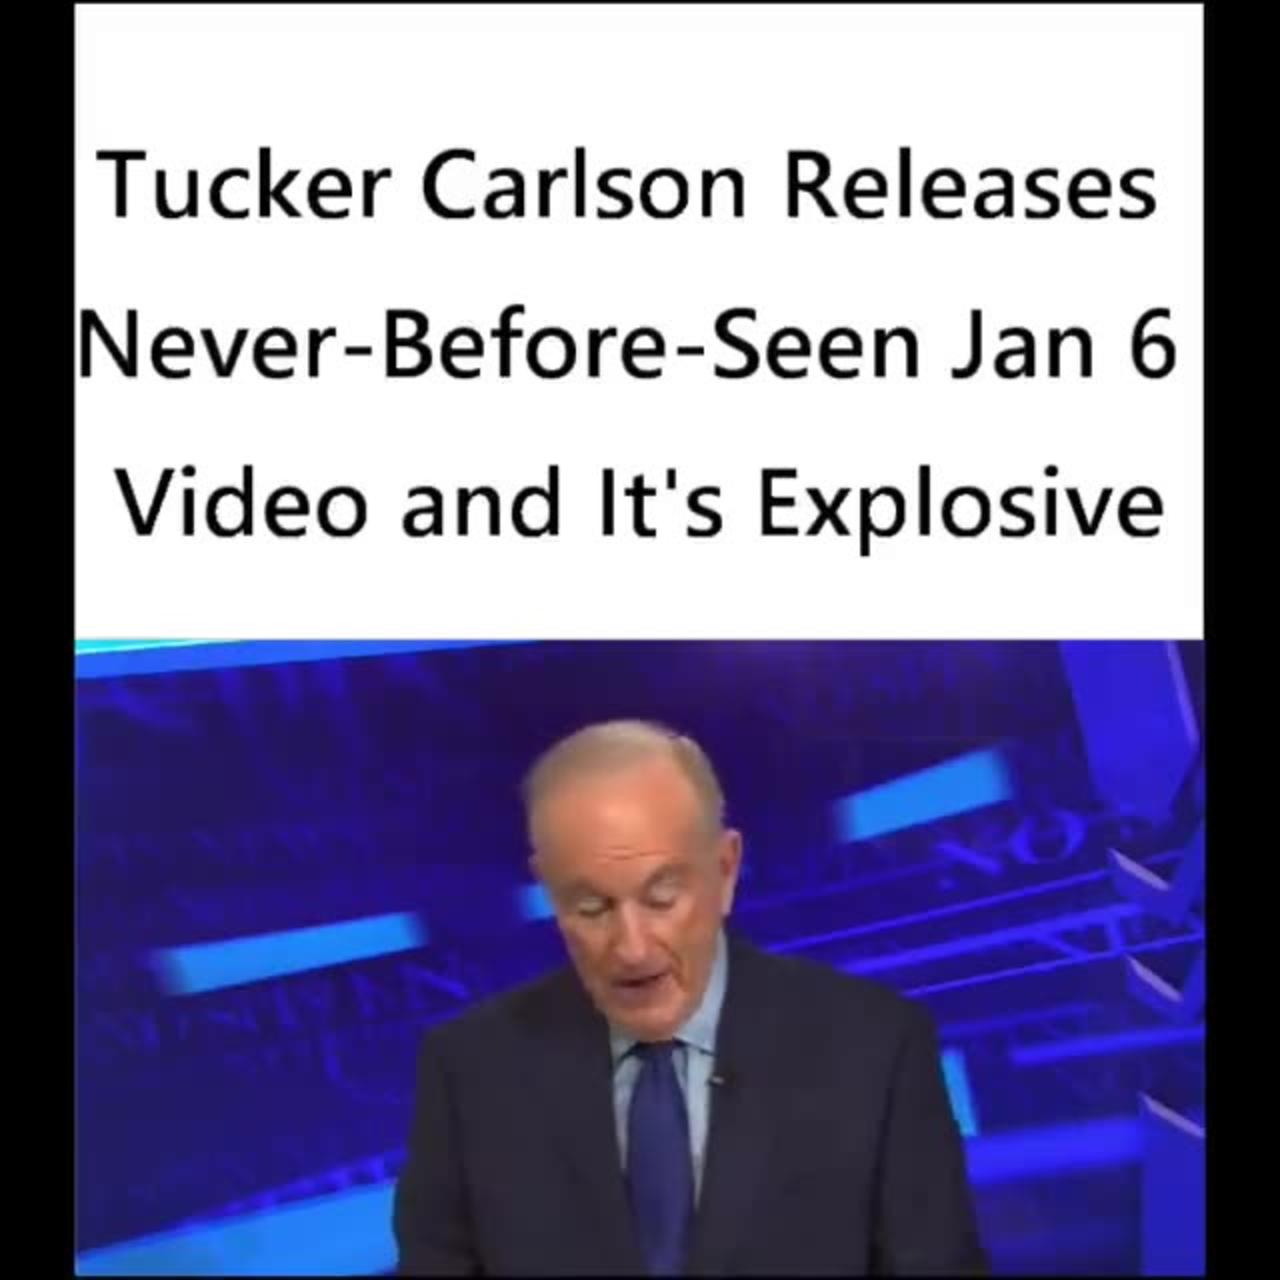 Tucker Carlson Releases Never-Before-Seen Jan 6 Video and It's Explosive